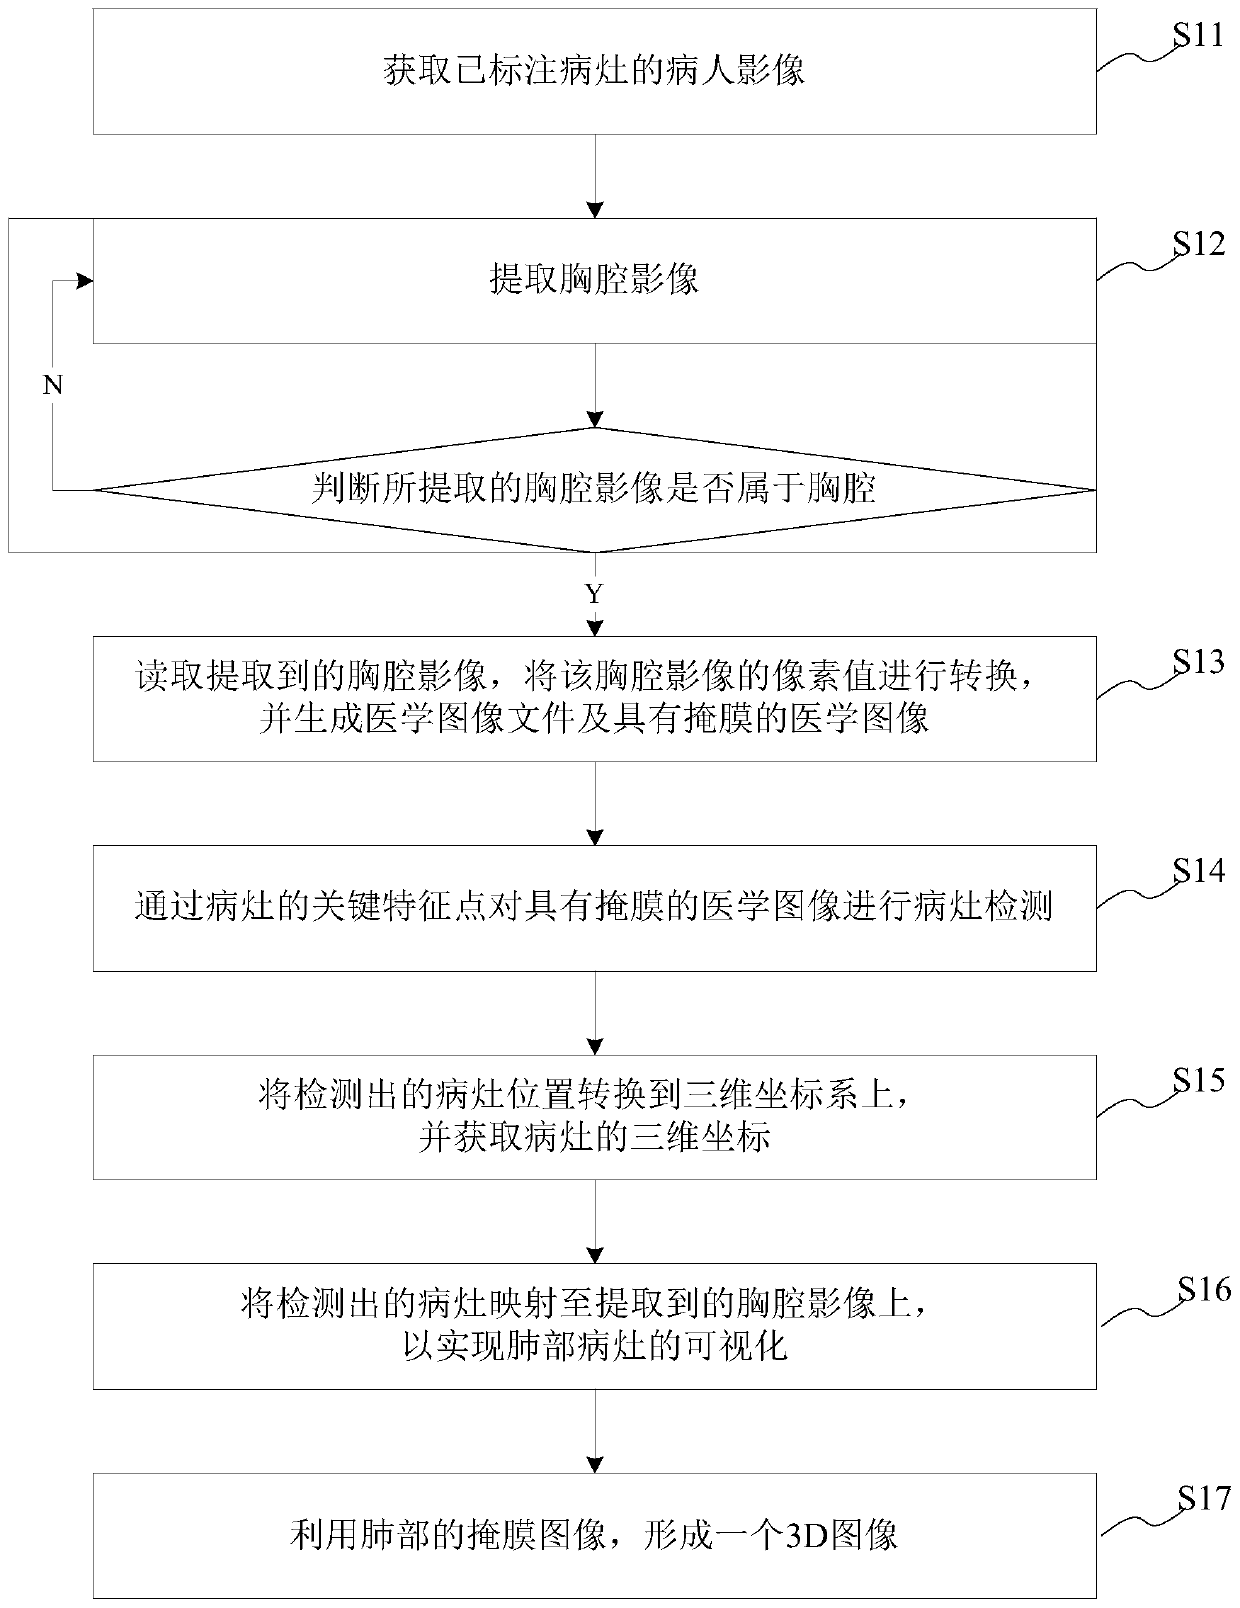 Lung lesion detection method and system, storage medium, terminal and display system